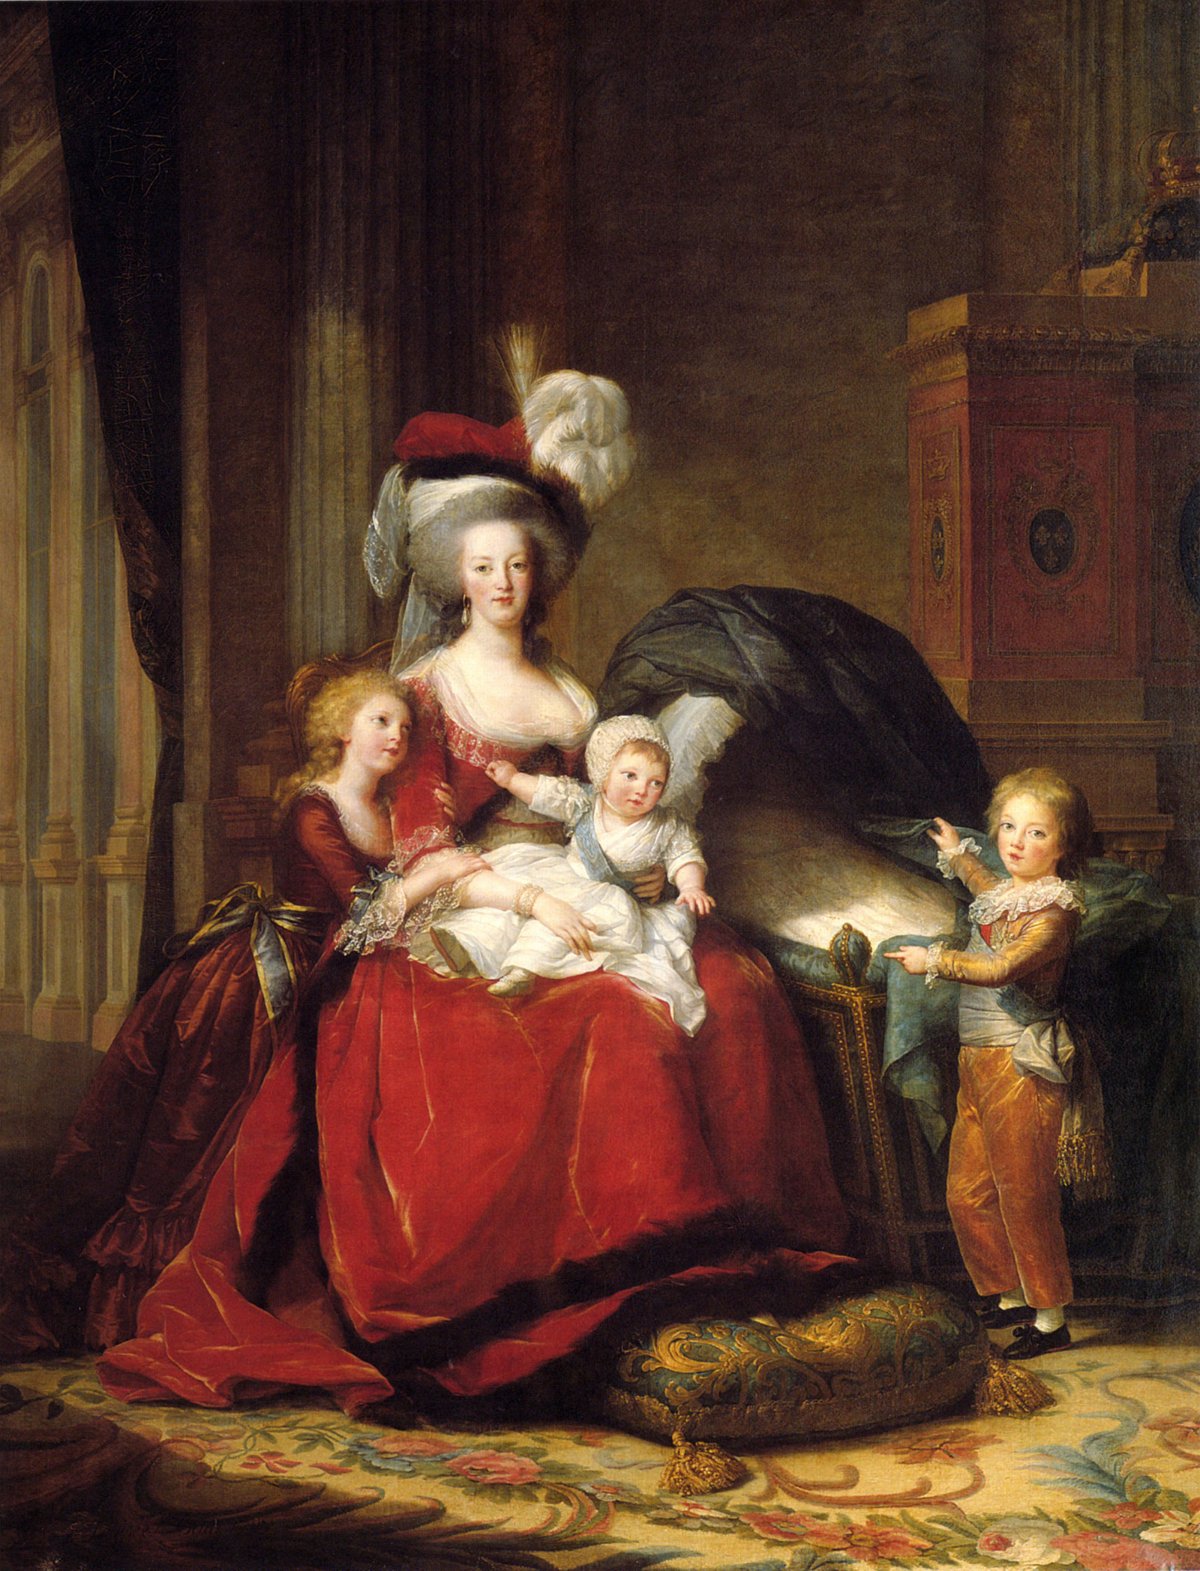 "Marie-Antoinette and her children", Élisabeth Vigée Le Brun, 1788, Collection of the Palace of Versailles.